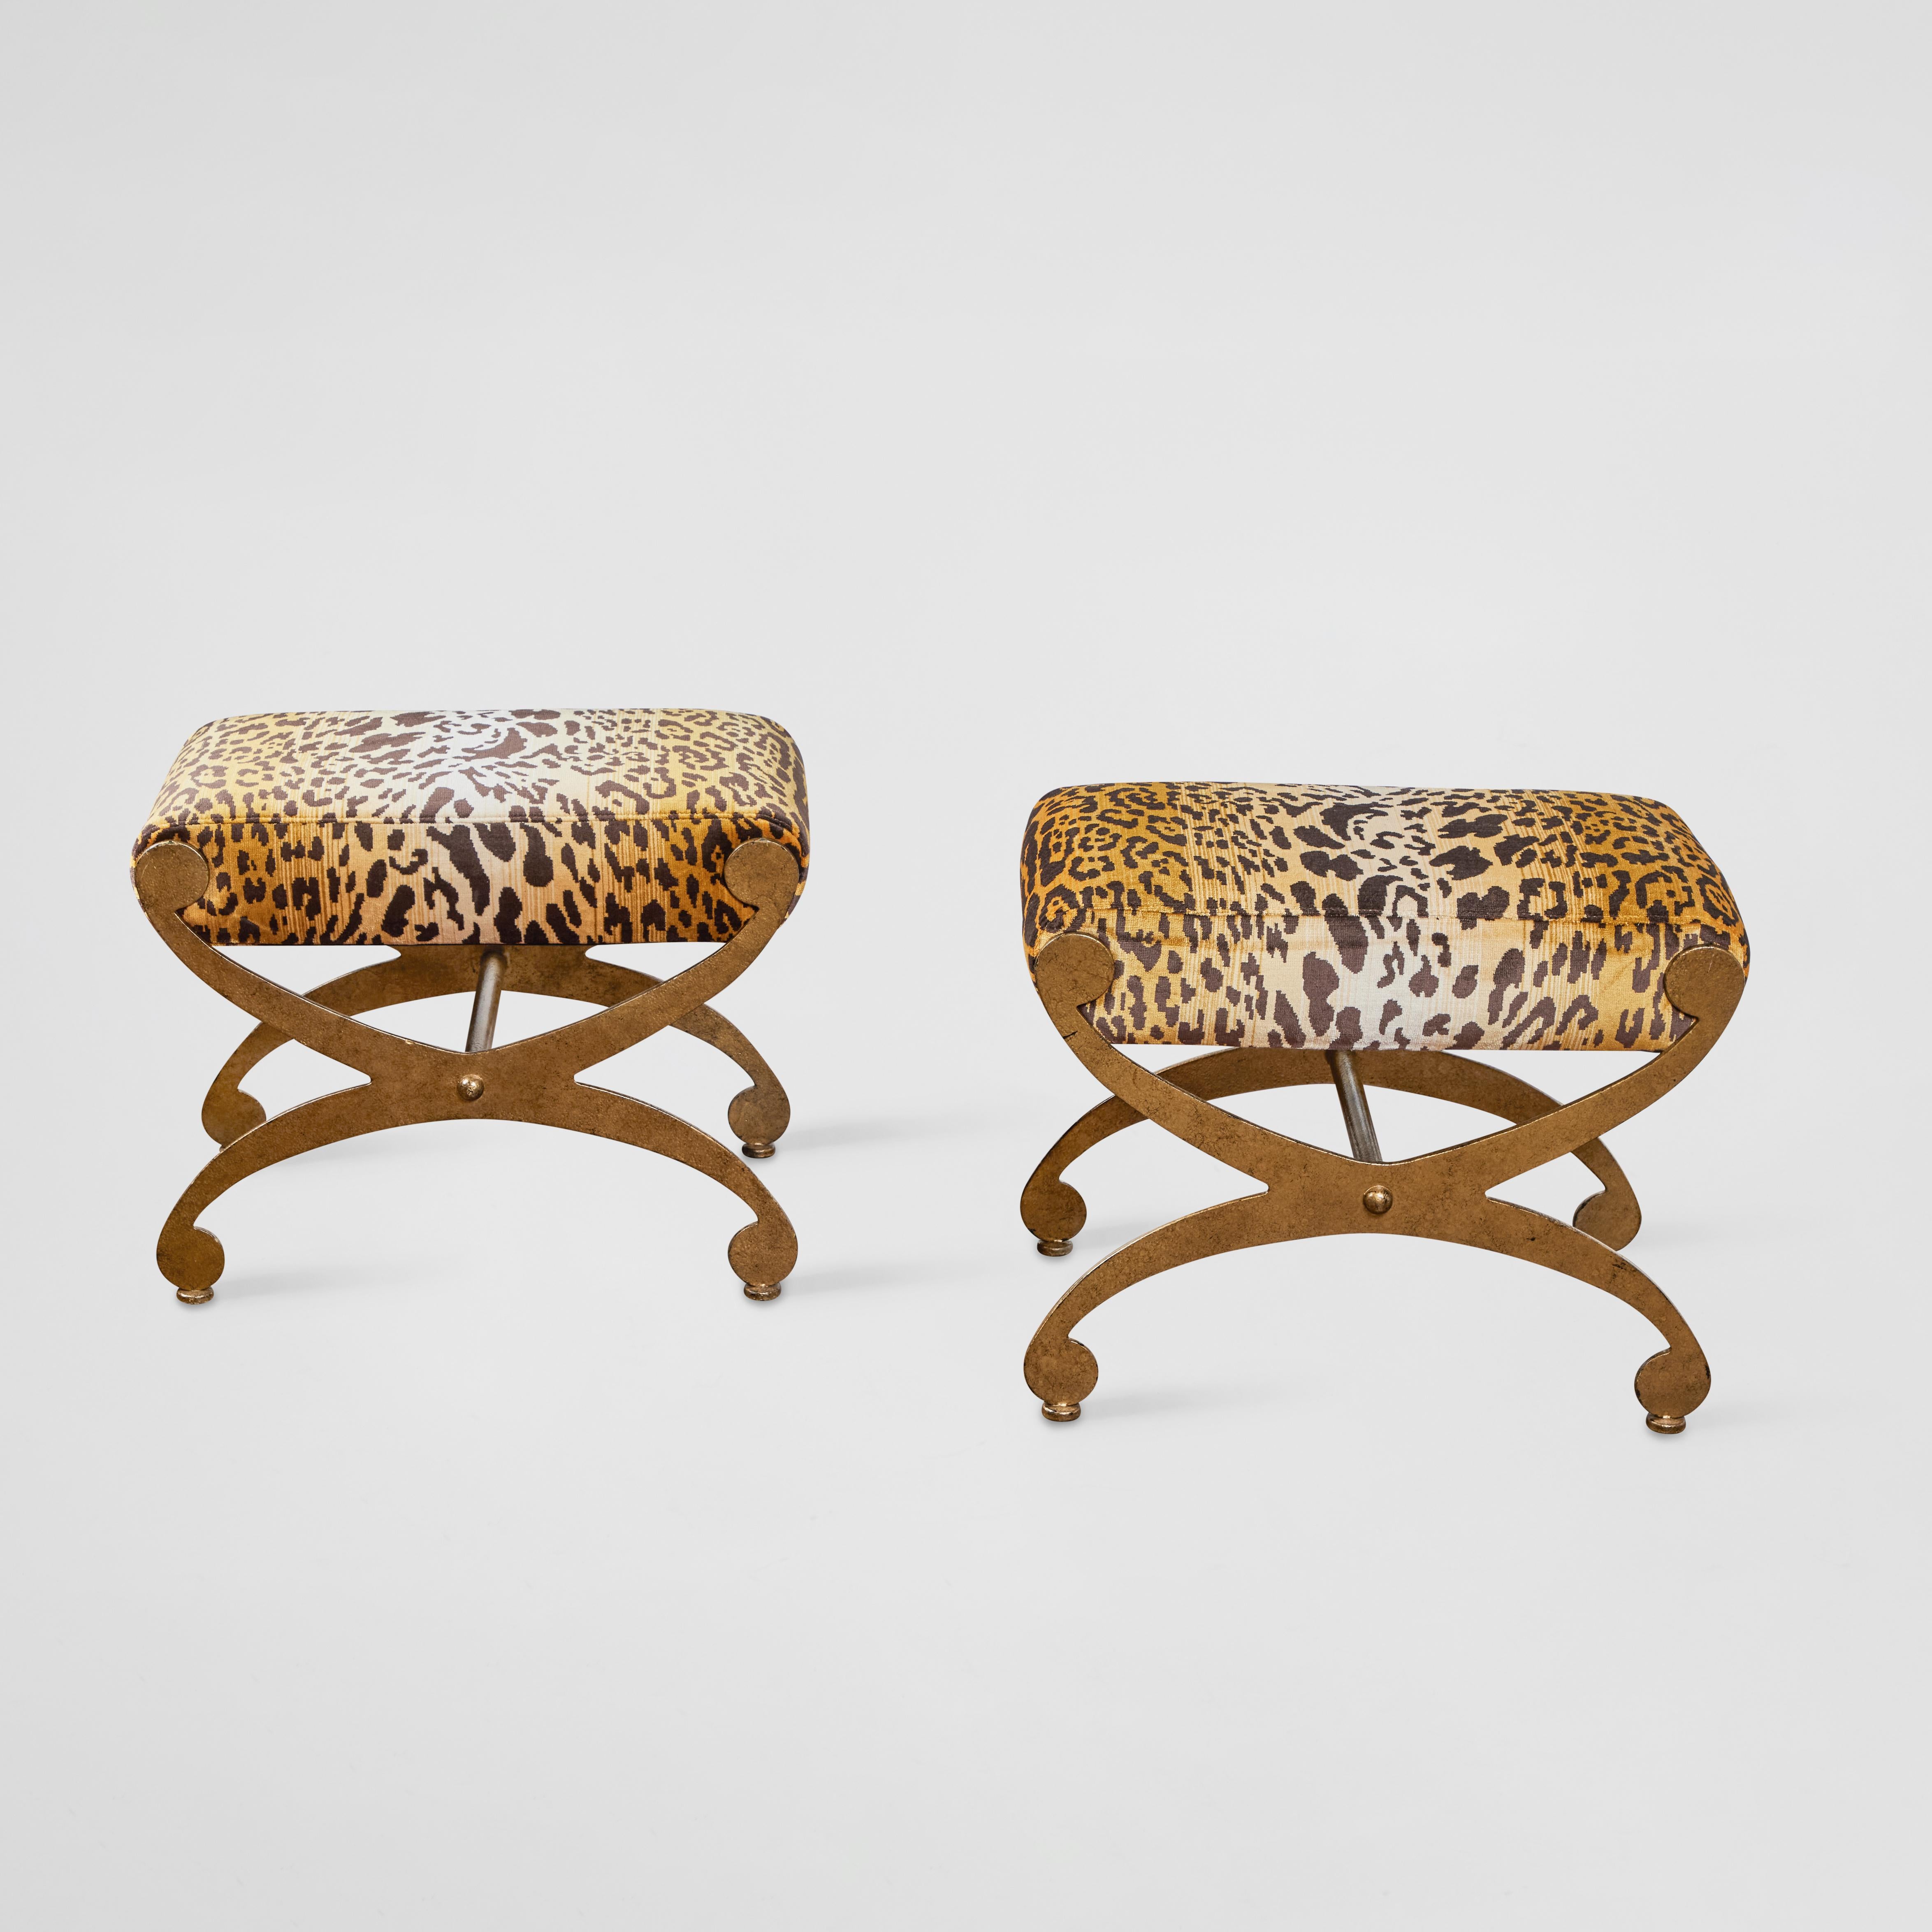 Pair of Italian Gilt Metal and Leopard Benches In Good Condition For Sale In Pasadena, CA